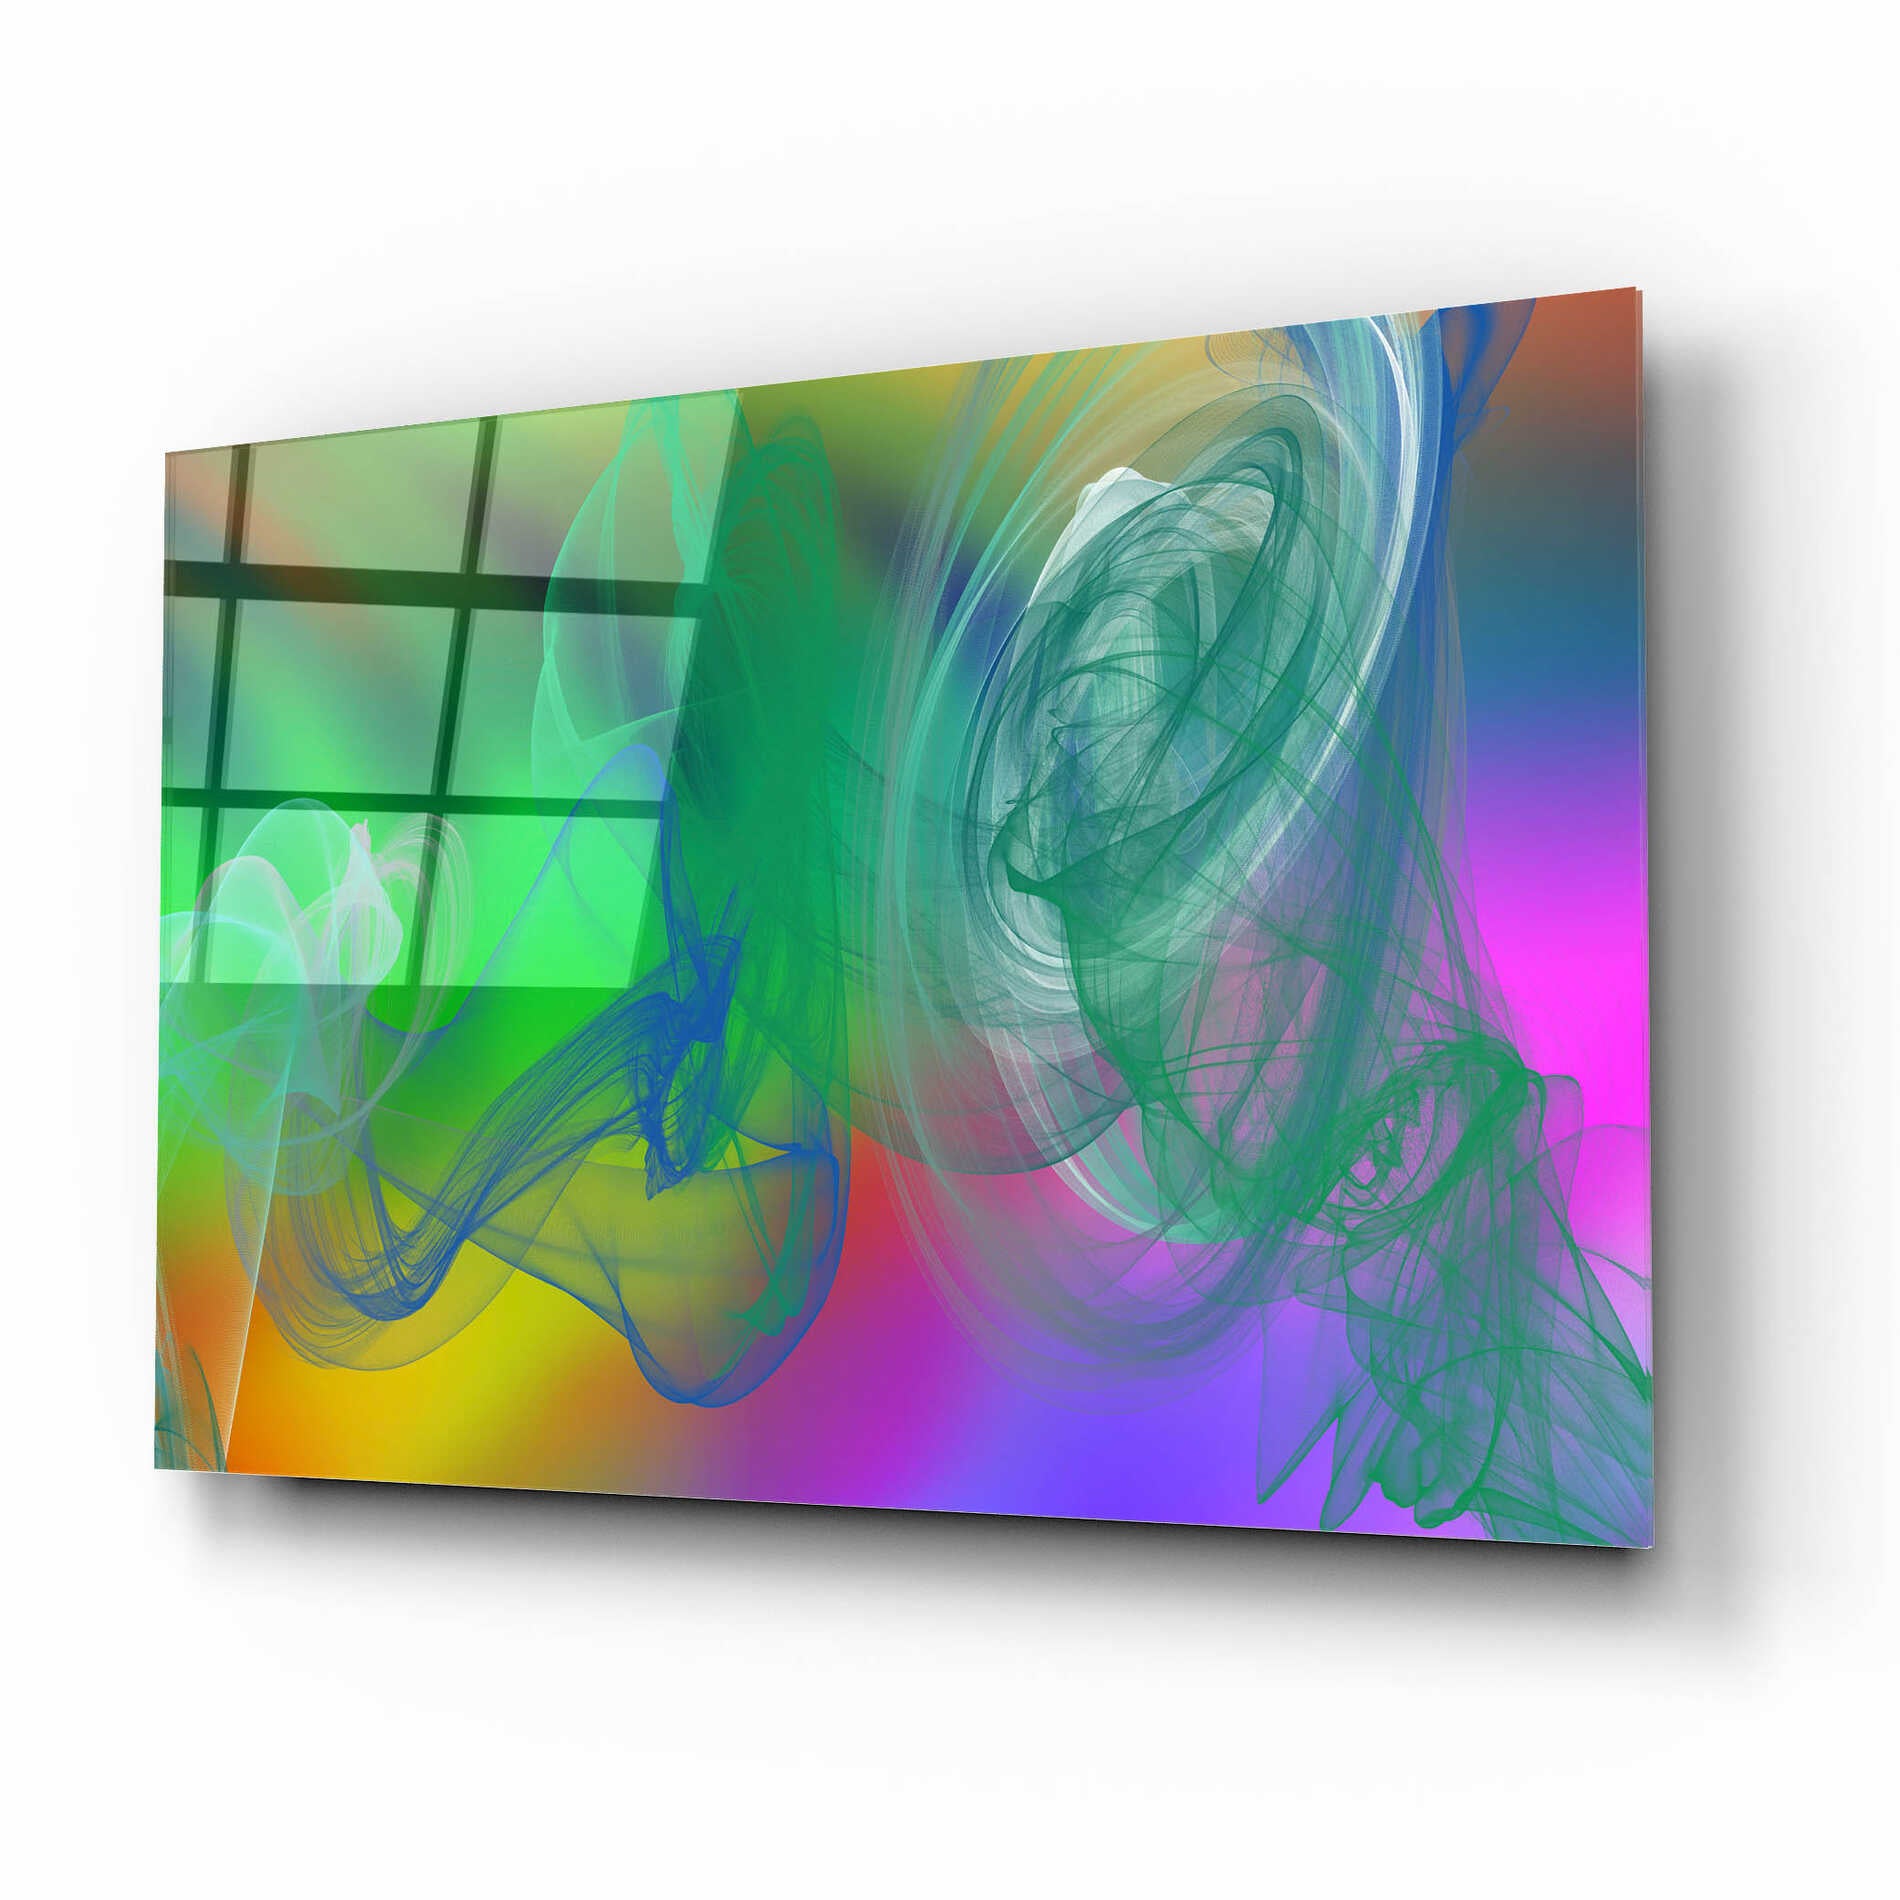 Epic Art 'Inverted Color In The Lines 5' by Irena Orlov Acrylic Glass Wall Art,16x12